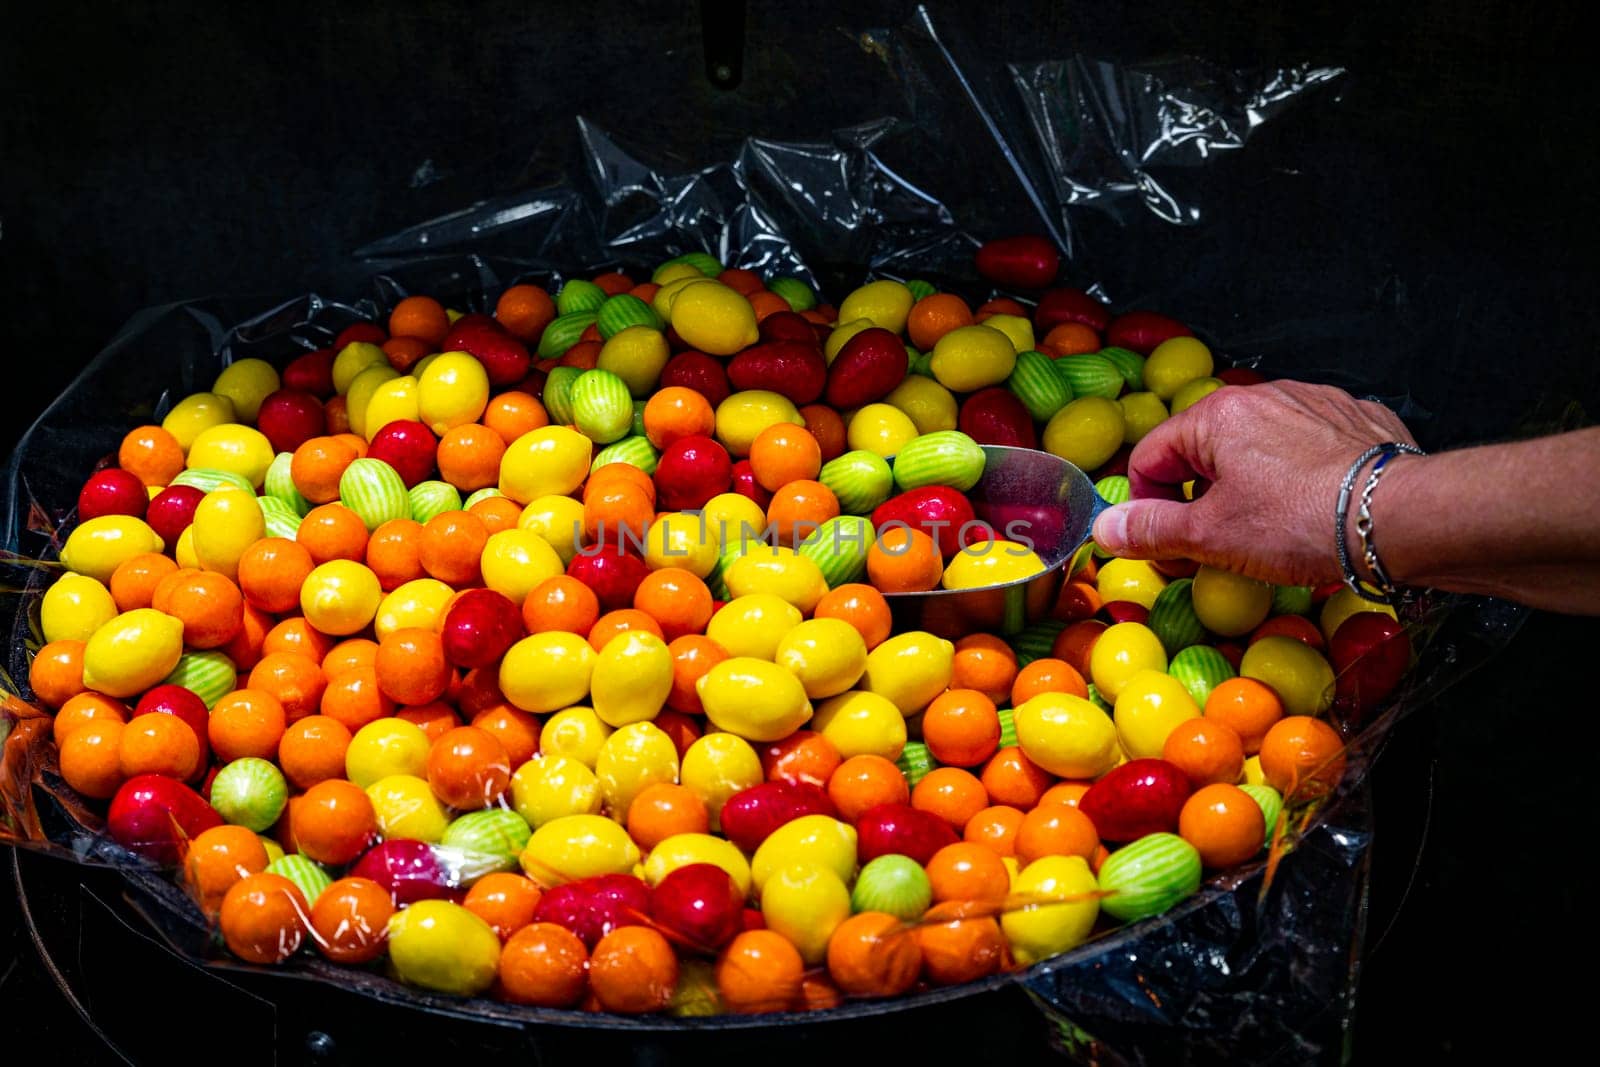 a woman's hand takes a number of candies from a large bowl with a shovel ina candy shop with an assortment of candies in orange red yellow.